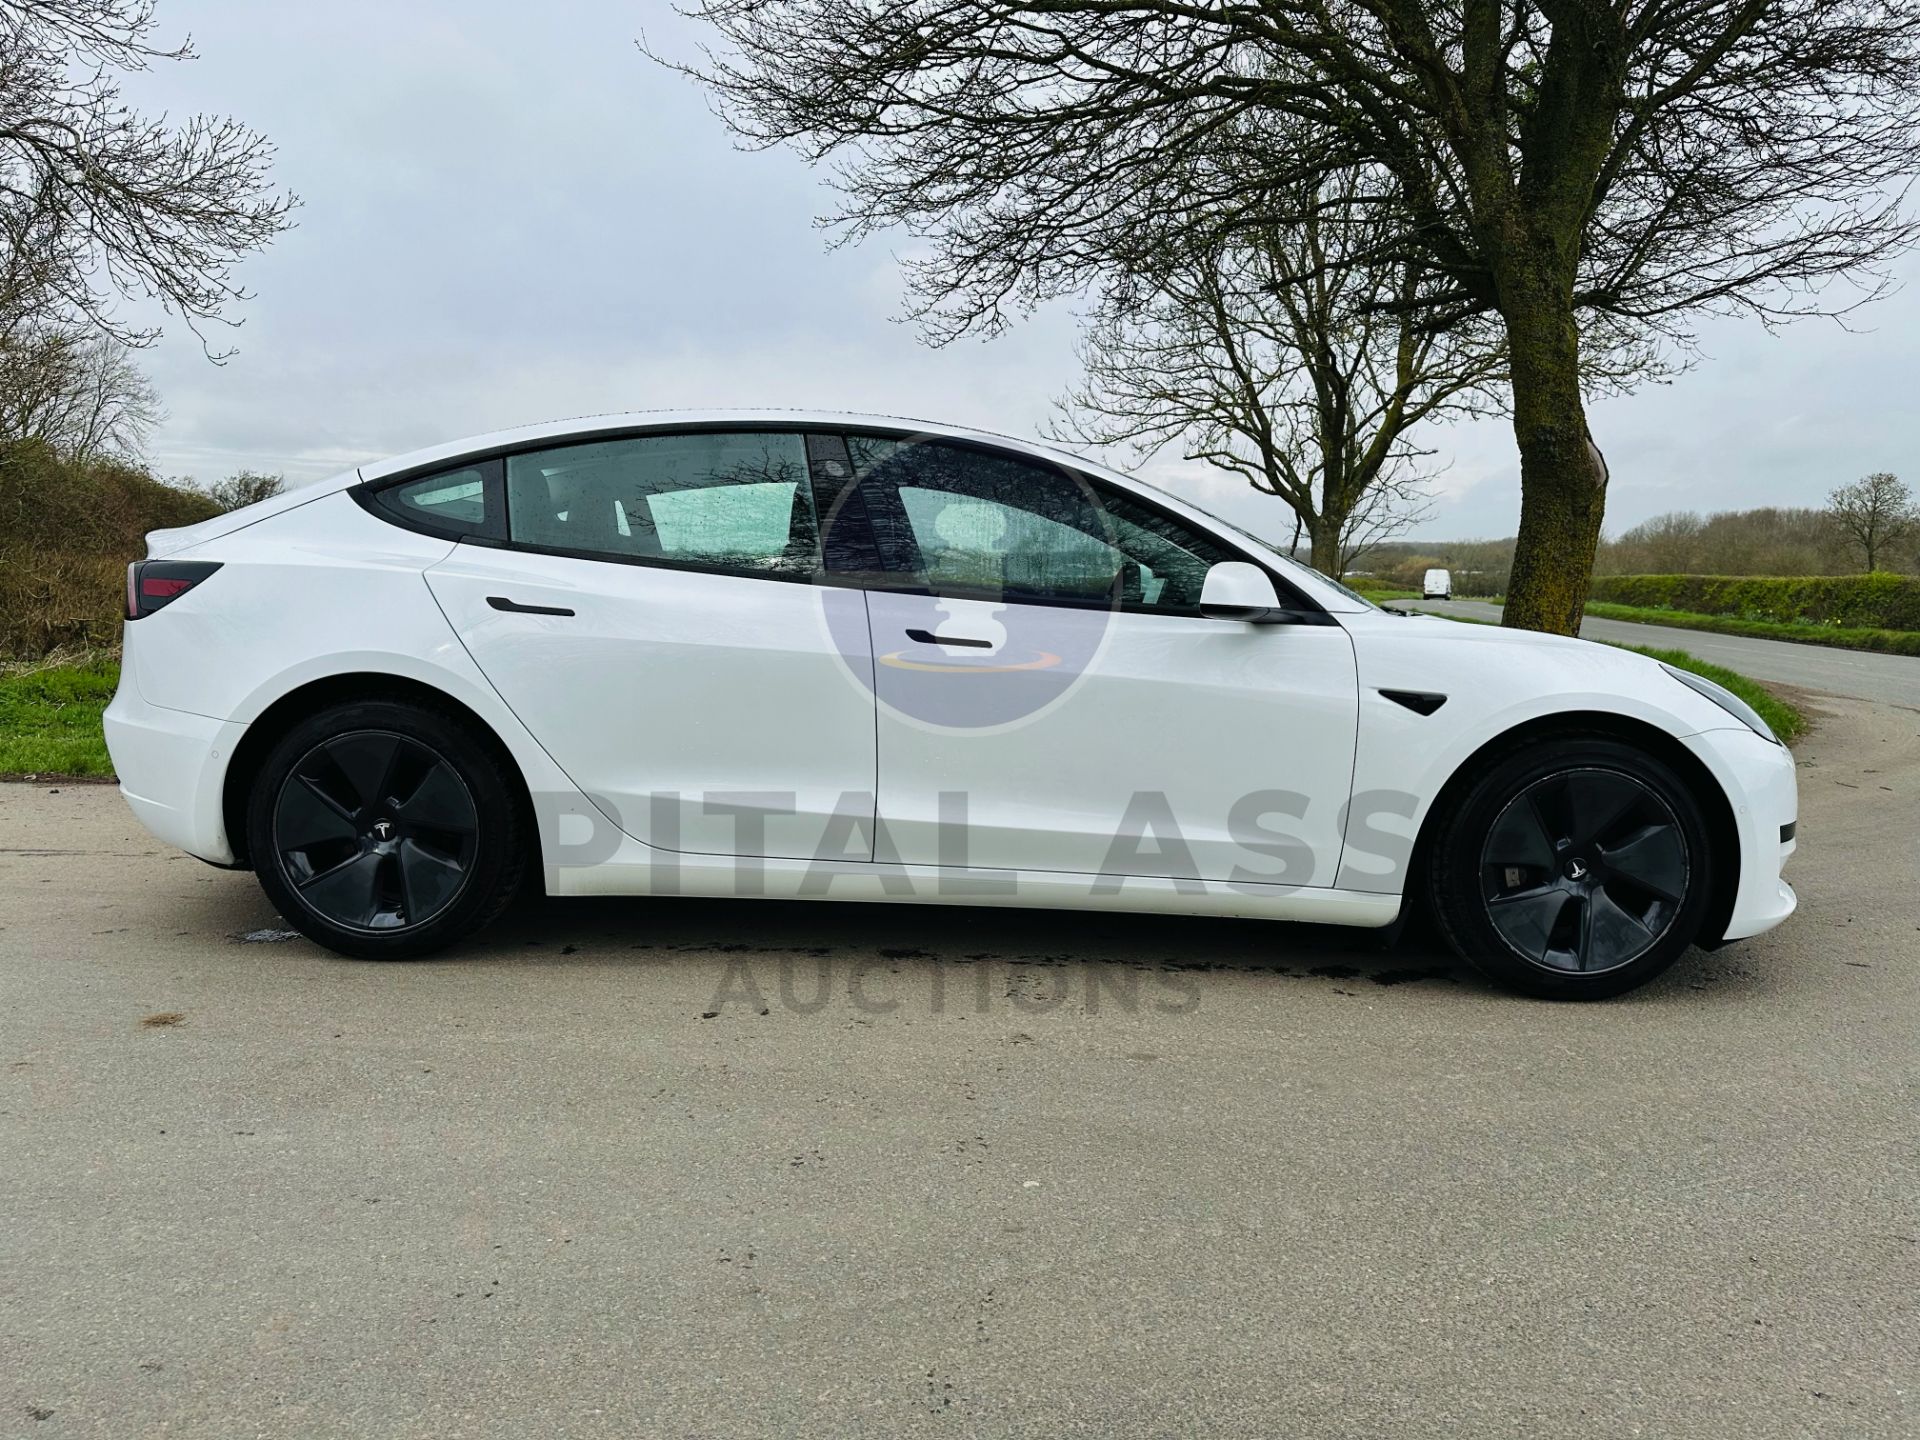 (ON SALE) TESLA MODEL 3 PLUS *PURE ELECTRIC* - 21 REG - PAN ROOF - LEATHER - TYPE 2 CHARGING CABLE! - Image 13 of 41